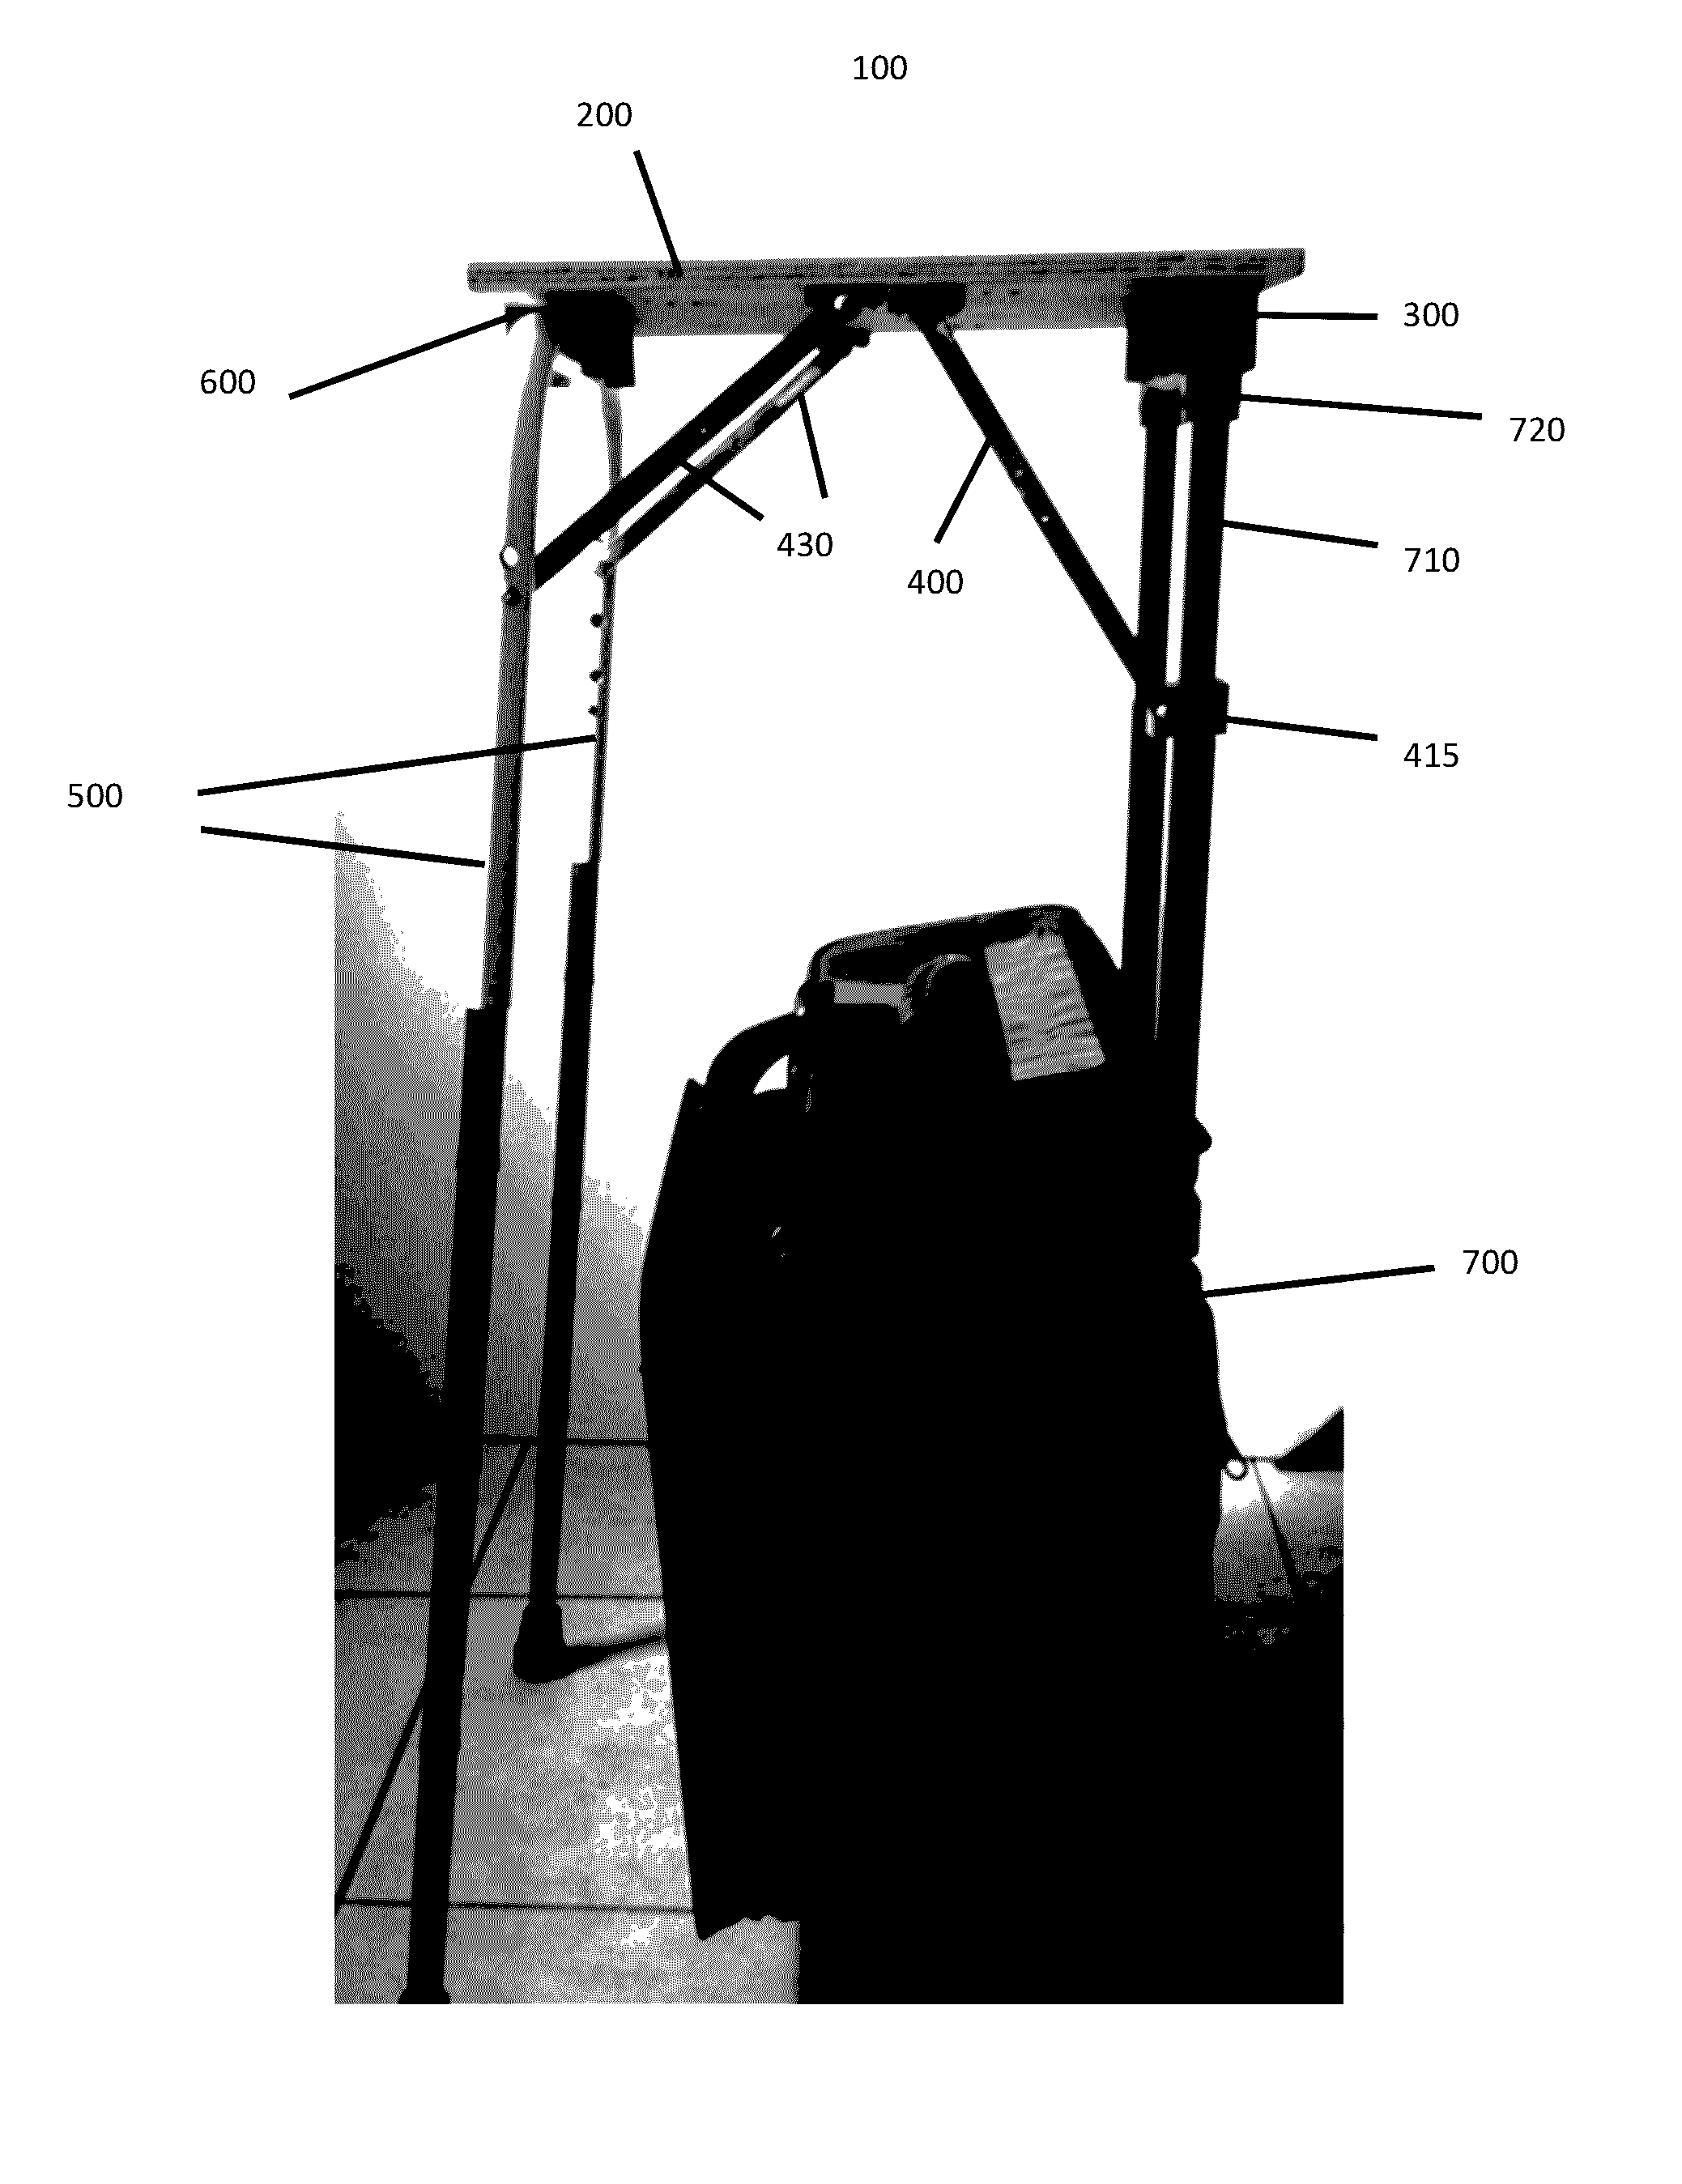 Height adjustable support tray apparatus